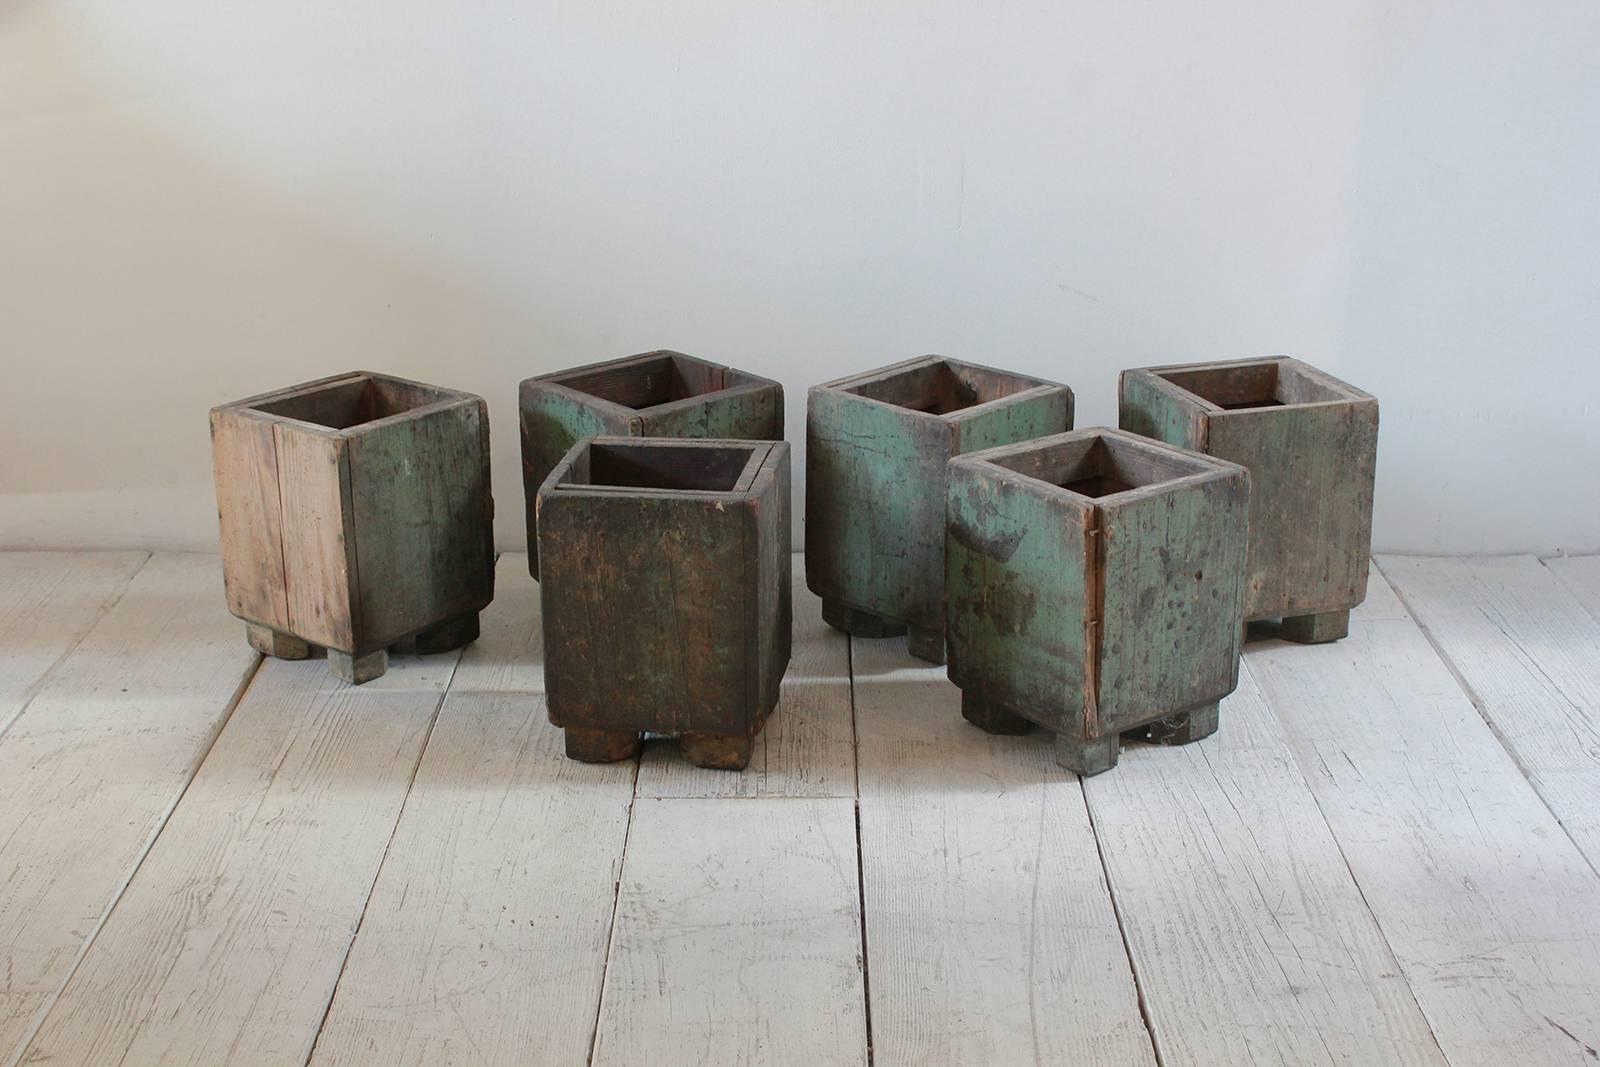 Square rustic wood planters with aged patina.